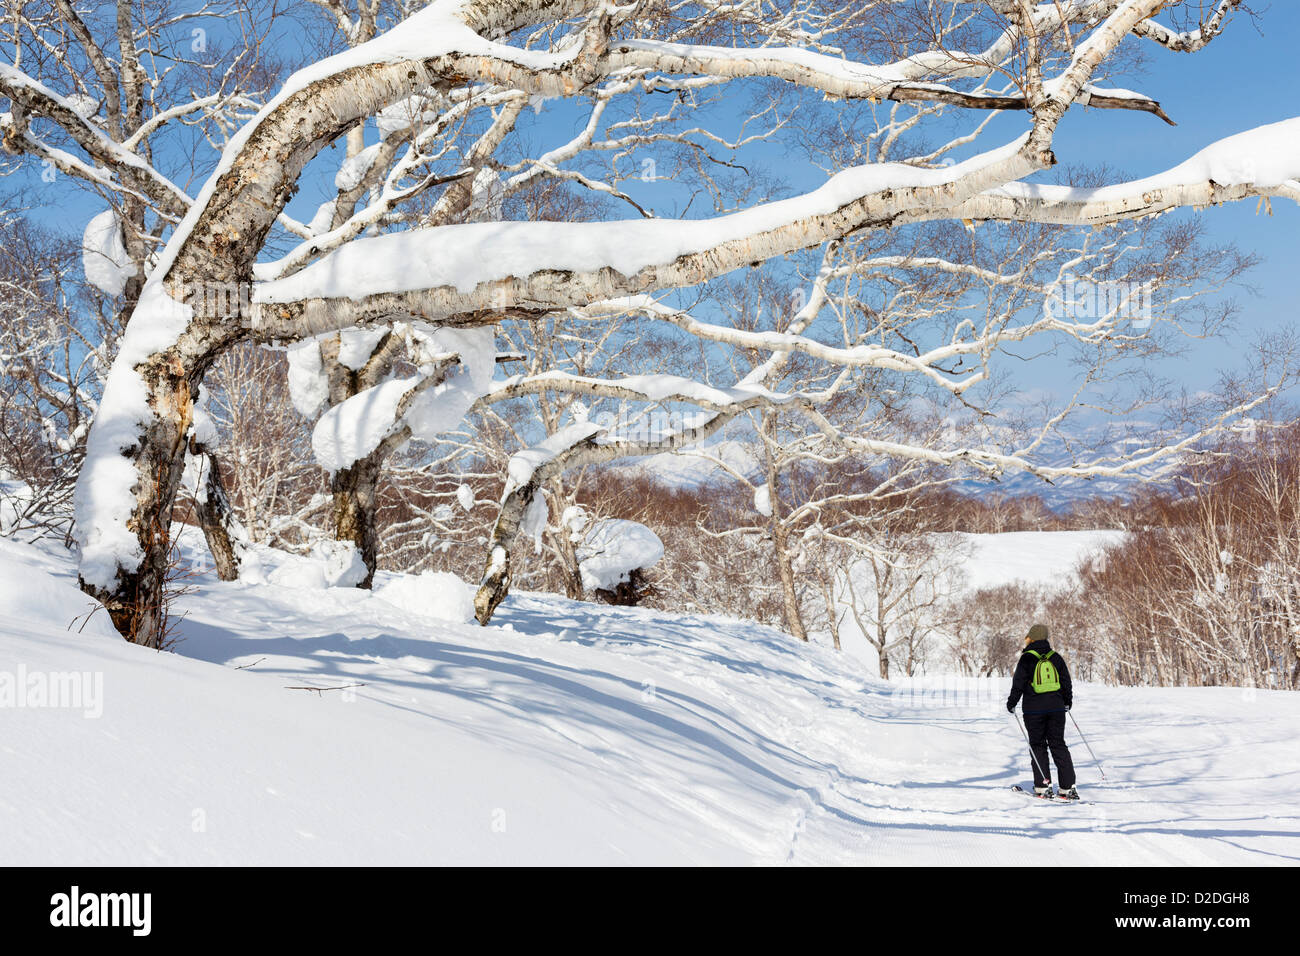 A female skier passes large silver birch trees covered in snow at the Niseko ski resort in Japan. Stock Photo